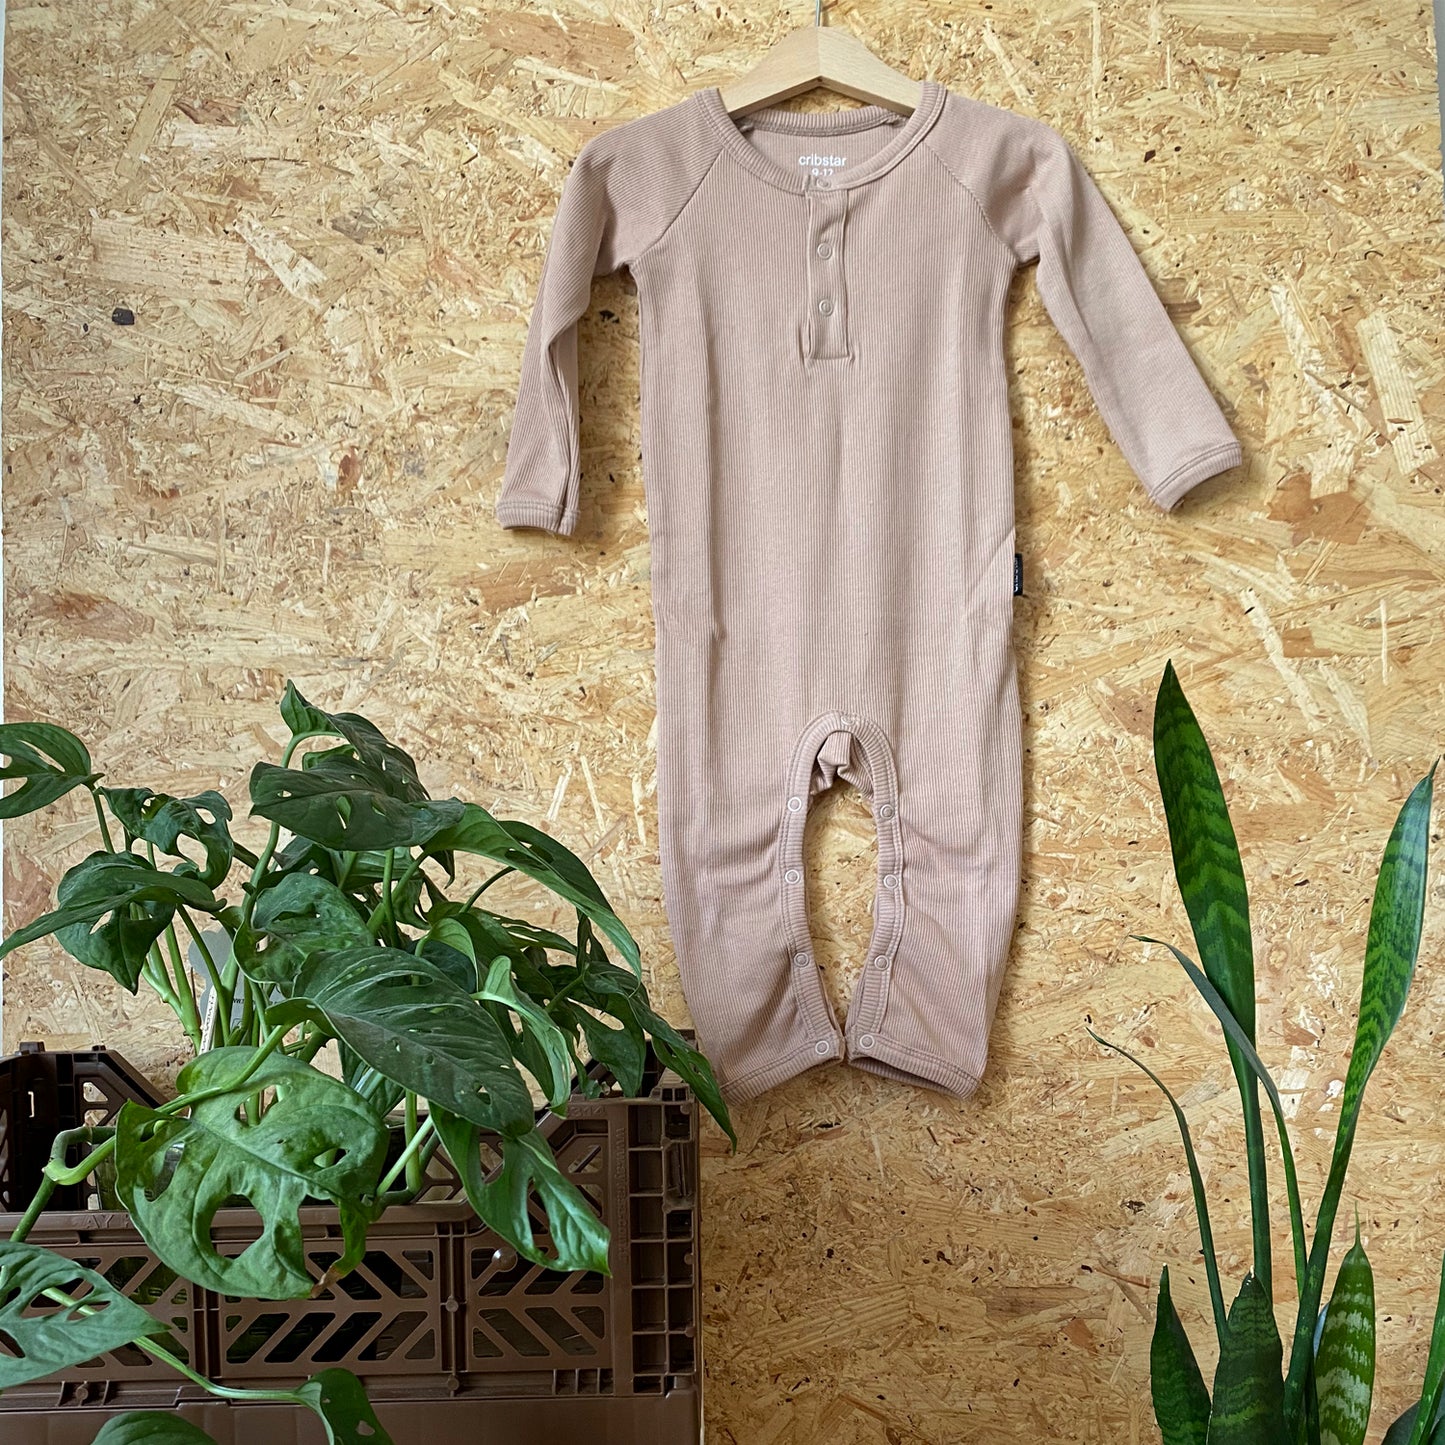 Ribbed romper - Toffee